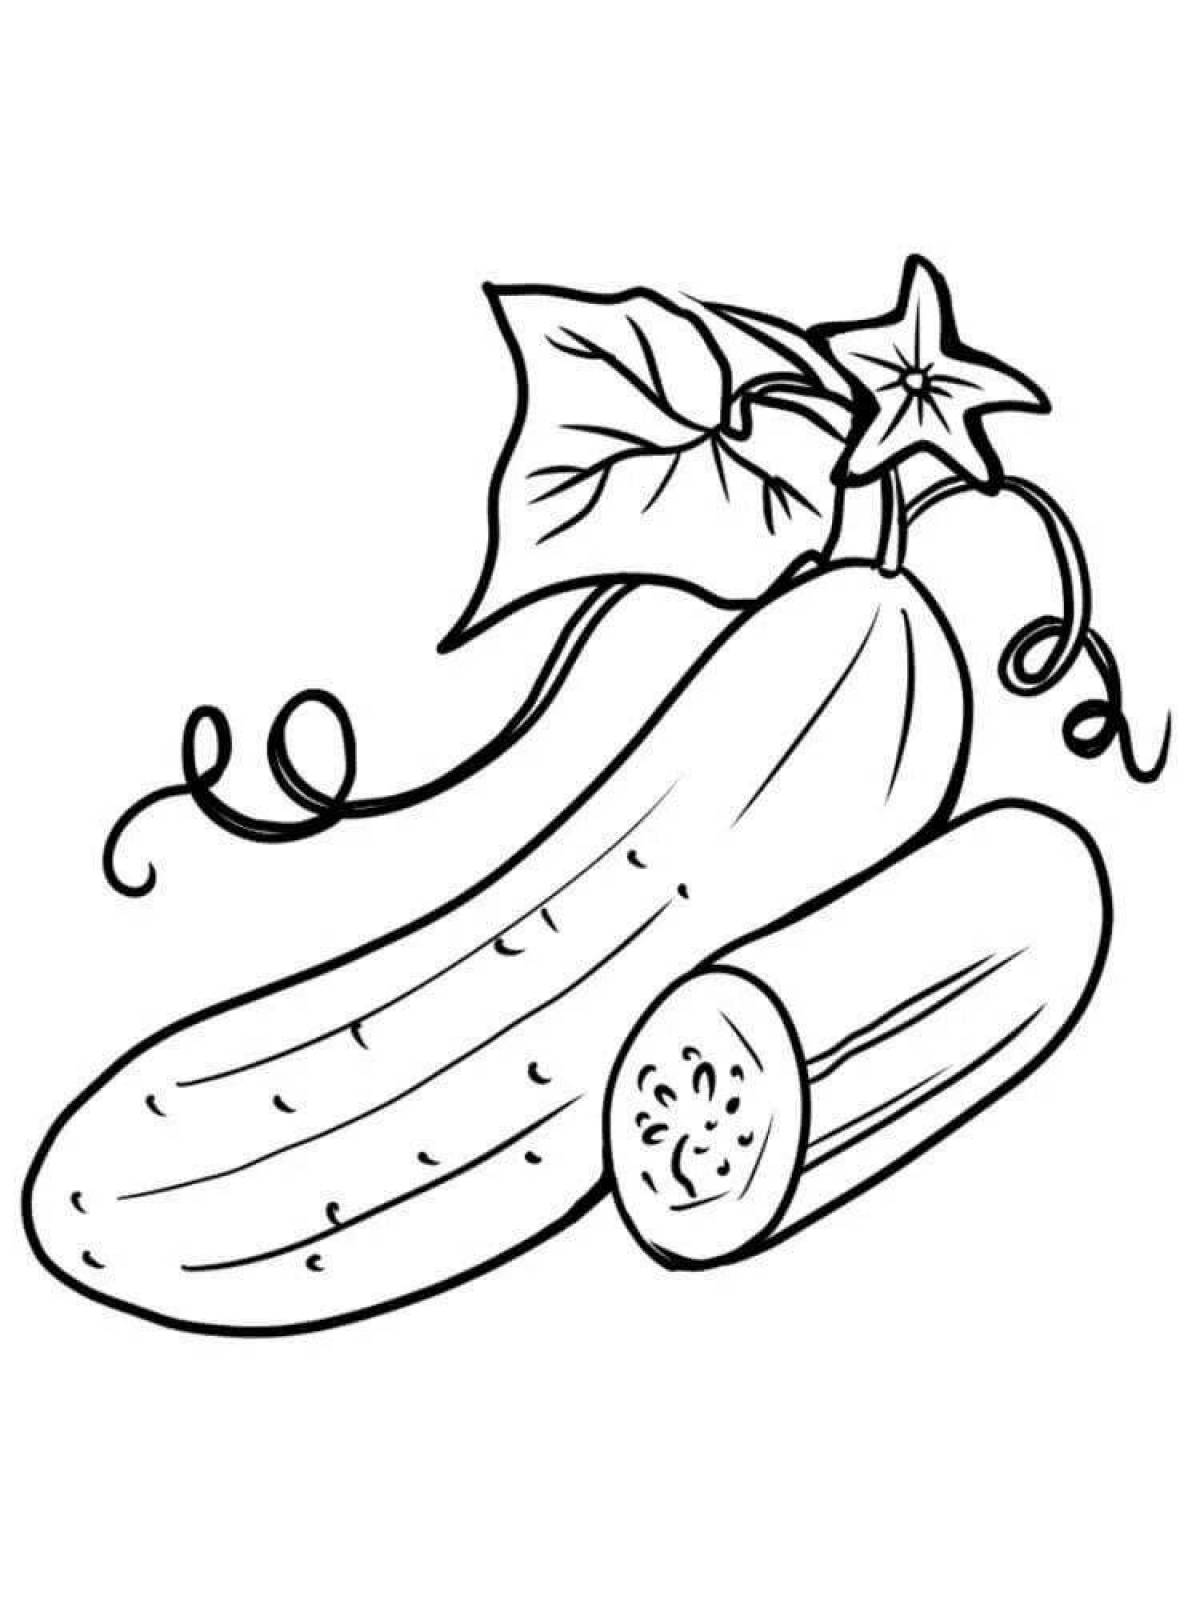 Colorful cucumber coloring page